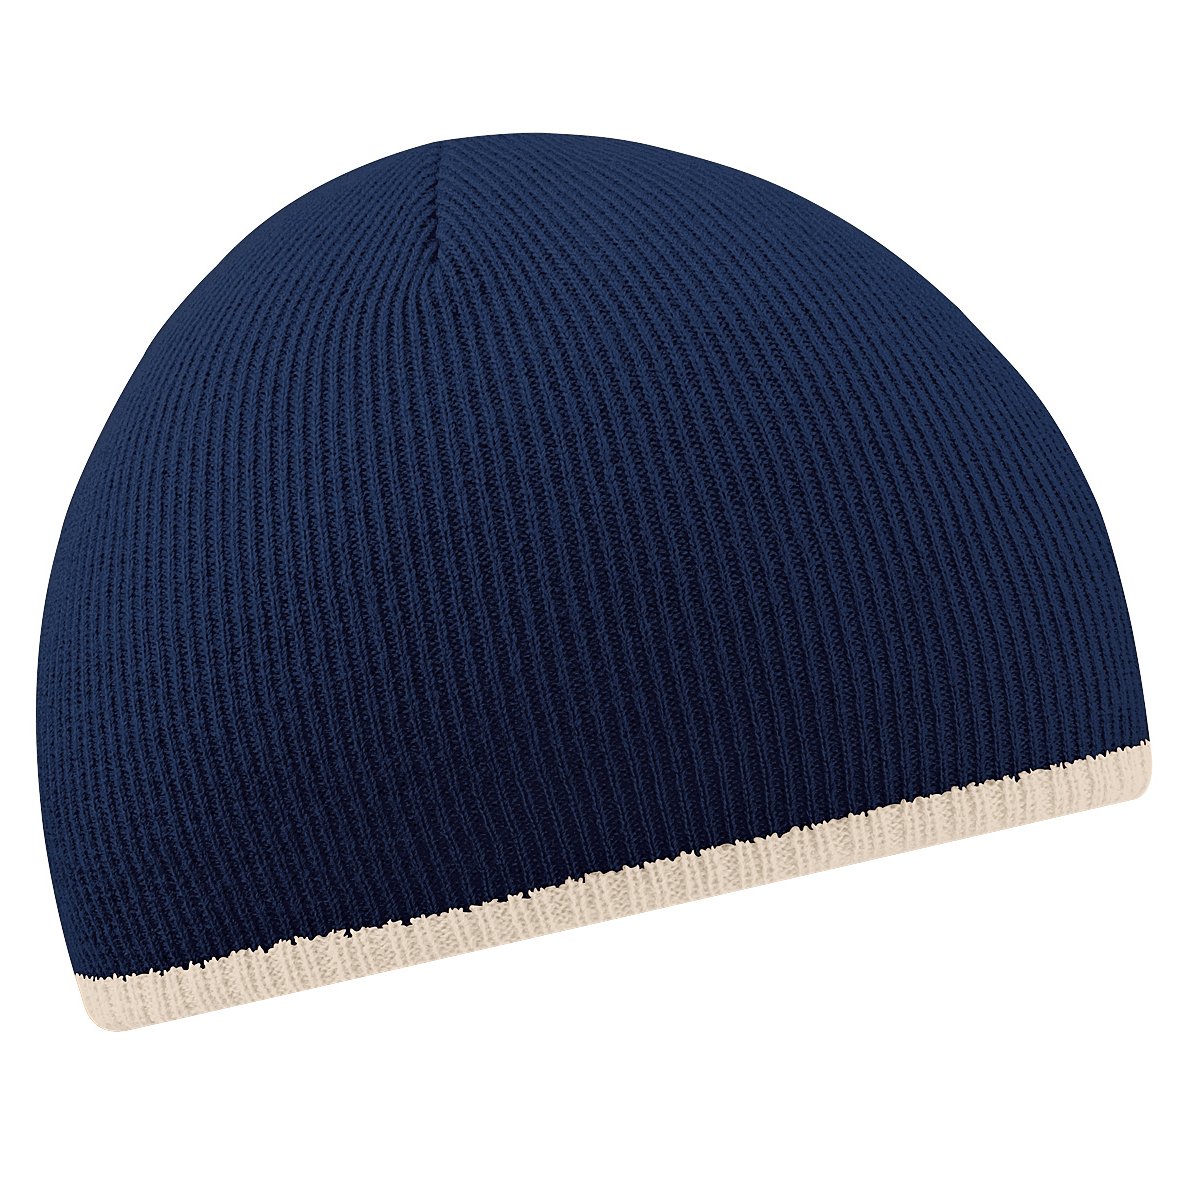 Beechfield  Two-Tone Knitted Winter Beanie Hat - image 2 of 2